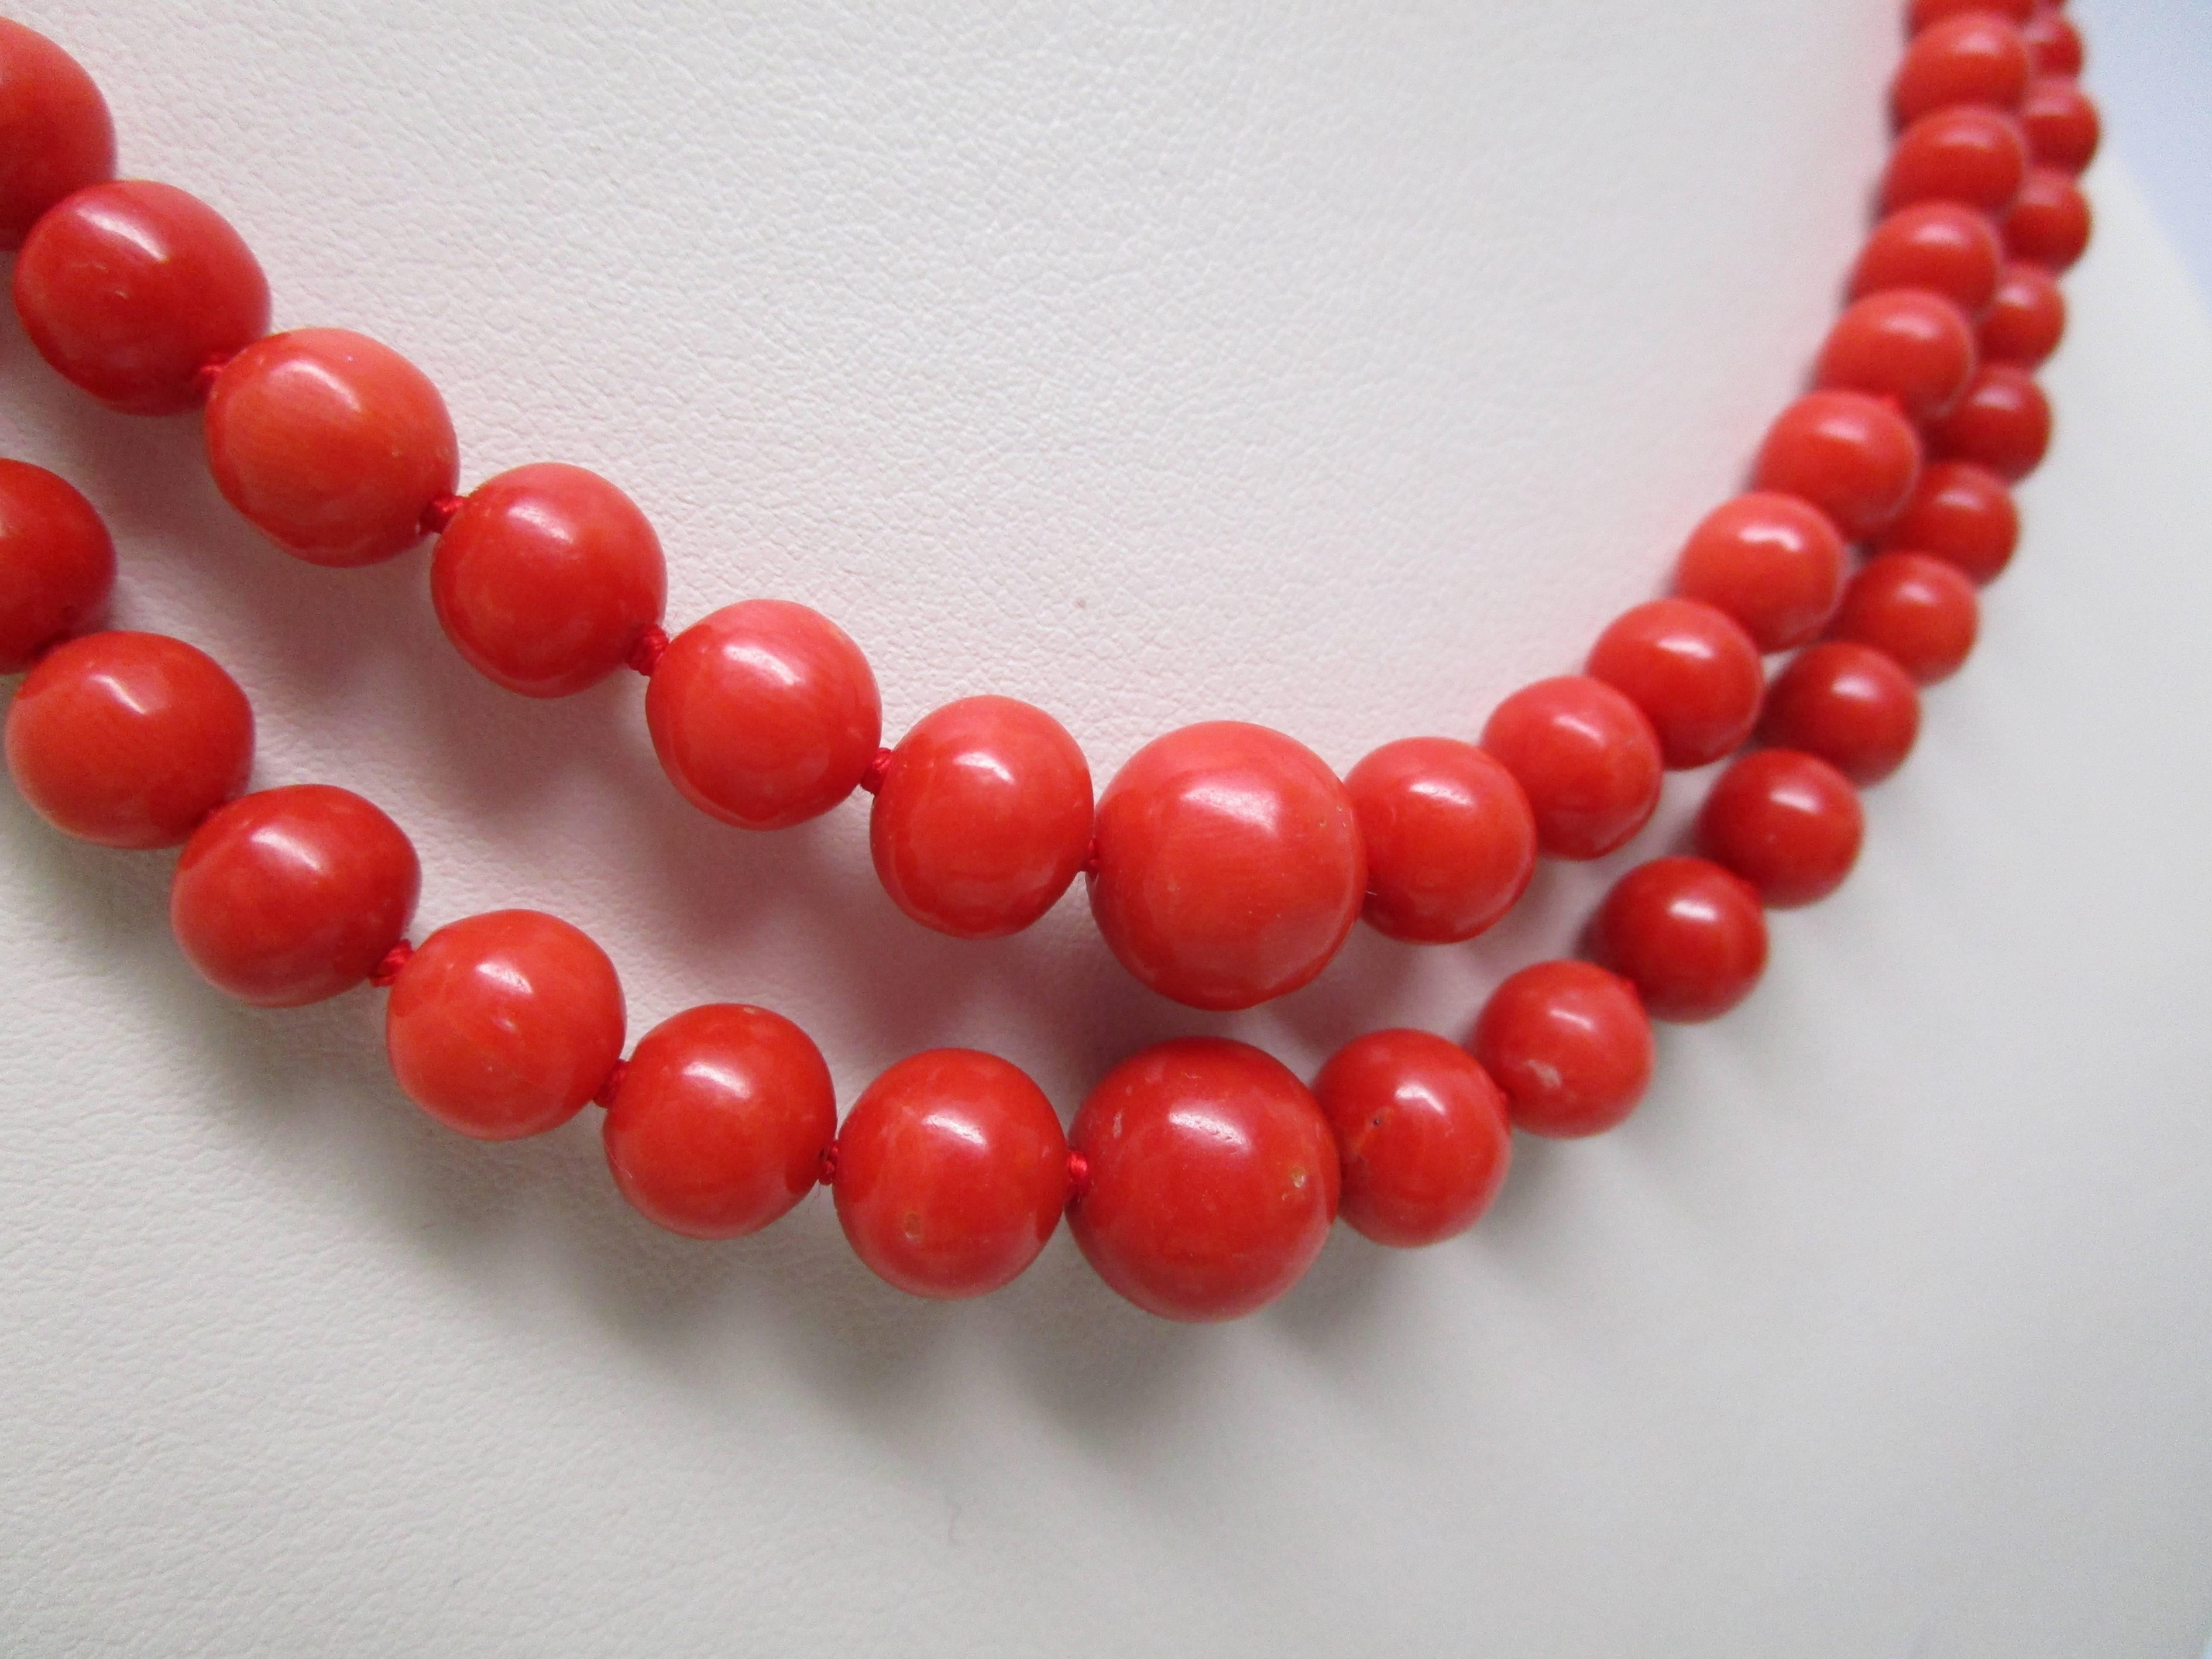 Natural, Undyed Mediterranean Coral Necklace c. 1860 
Mid Victorian

Nestled Double Strand of Coral
Longer Length 87 beads, 23+ inches 
Shorter Length 81 beads, 21.5+  inches

The beads are graduated from 5.0 mm at the smallest to 10.0 mm at